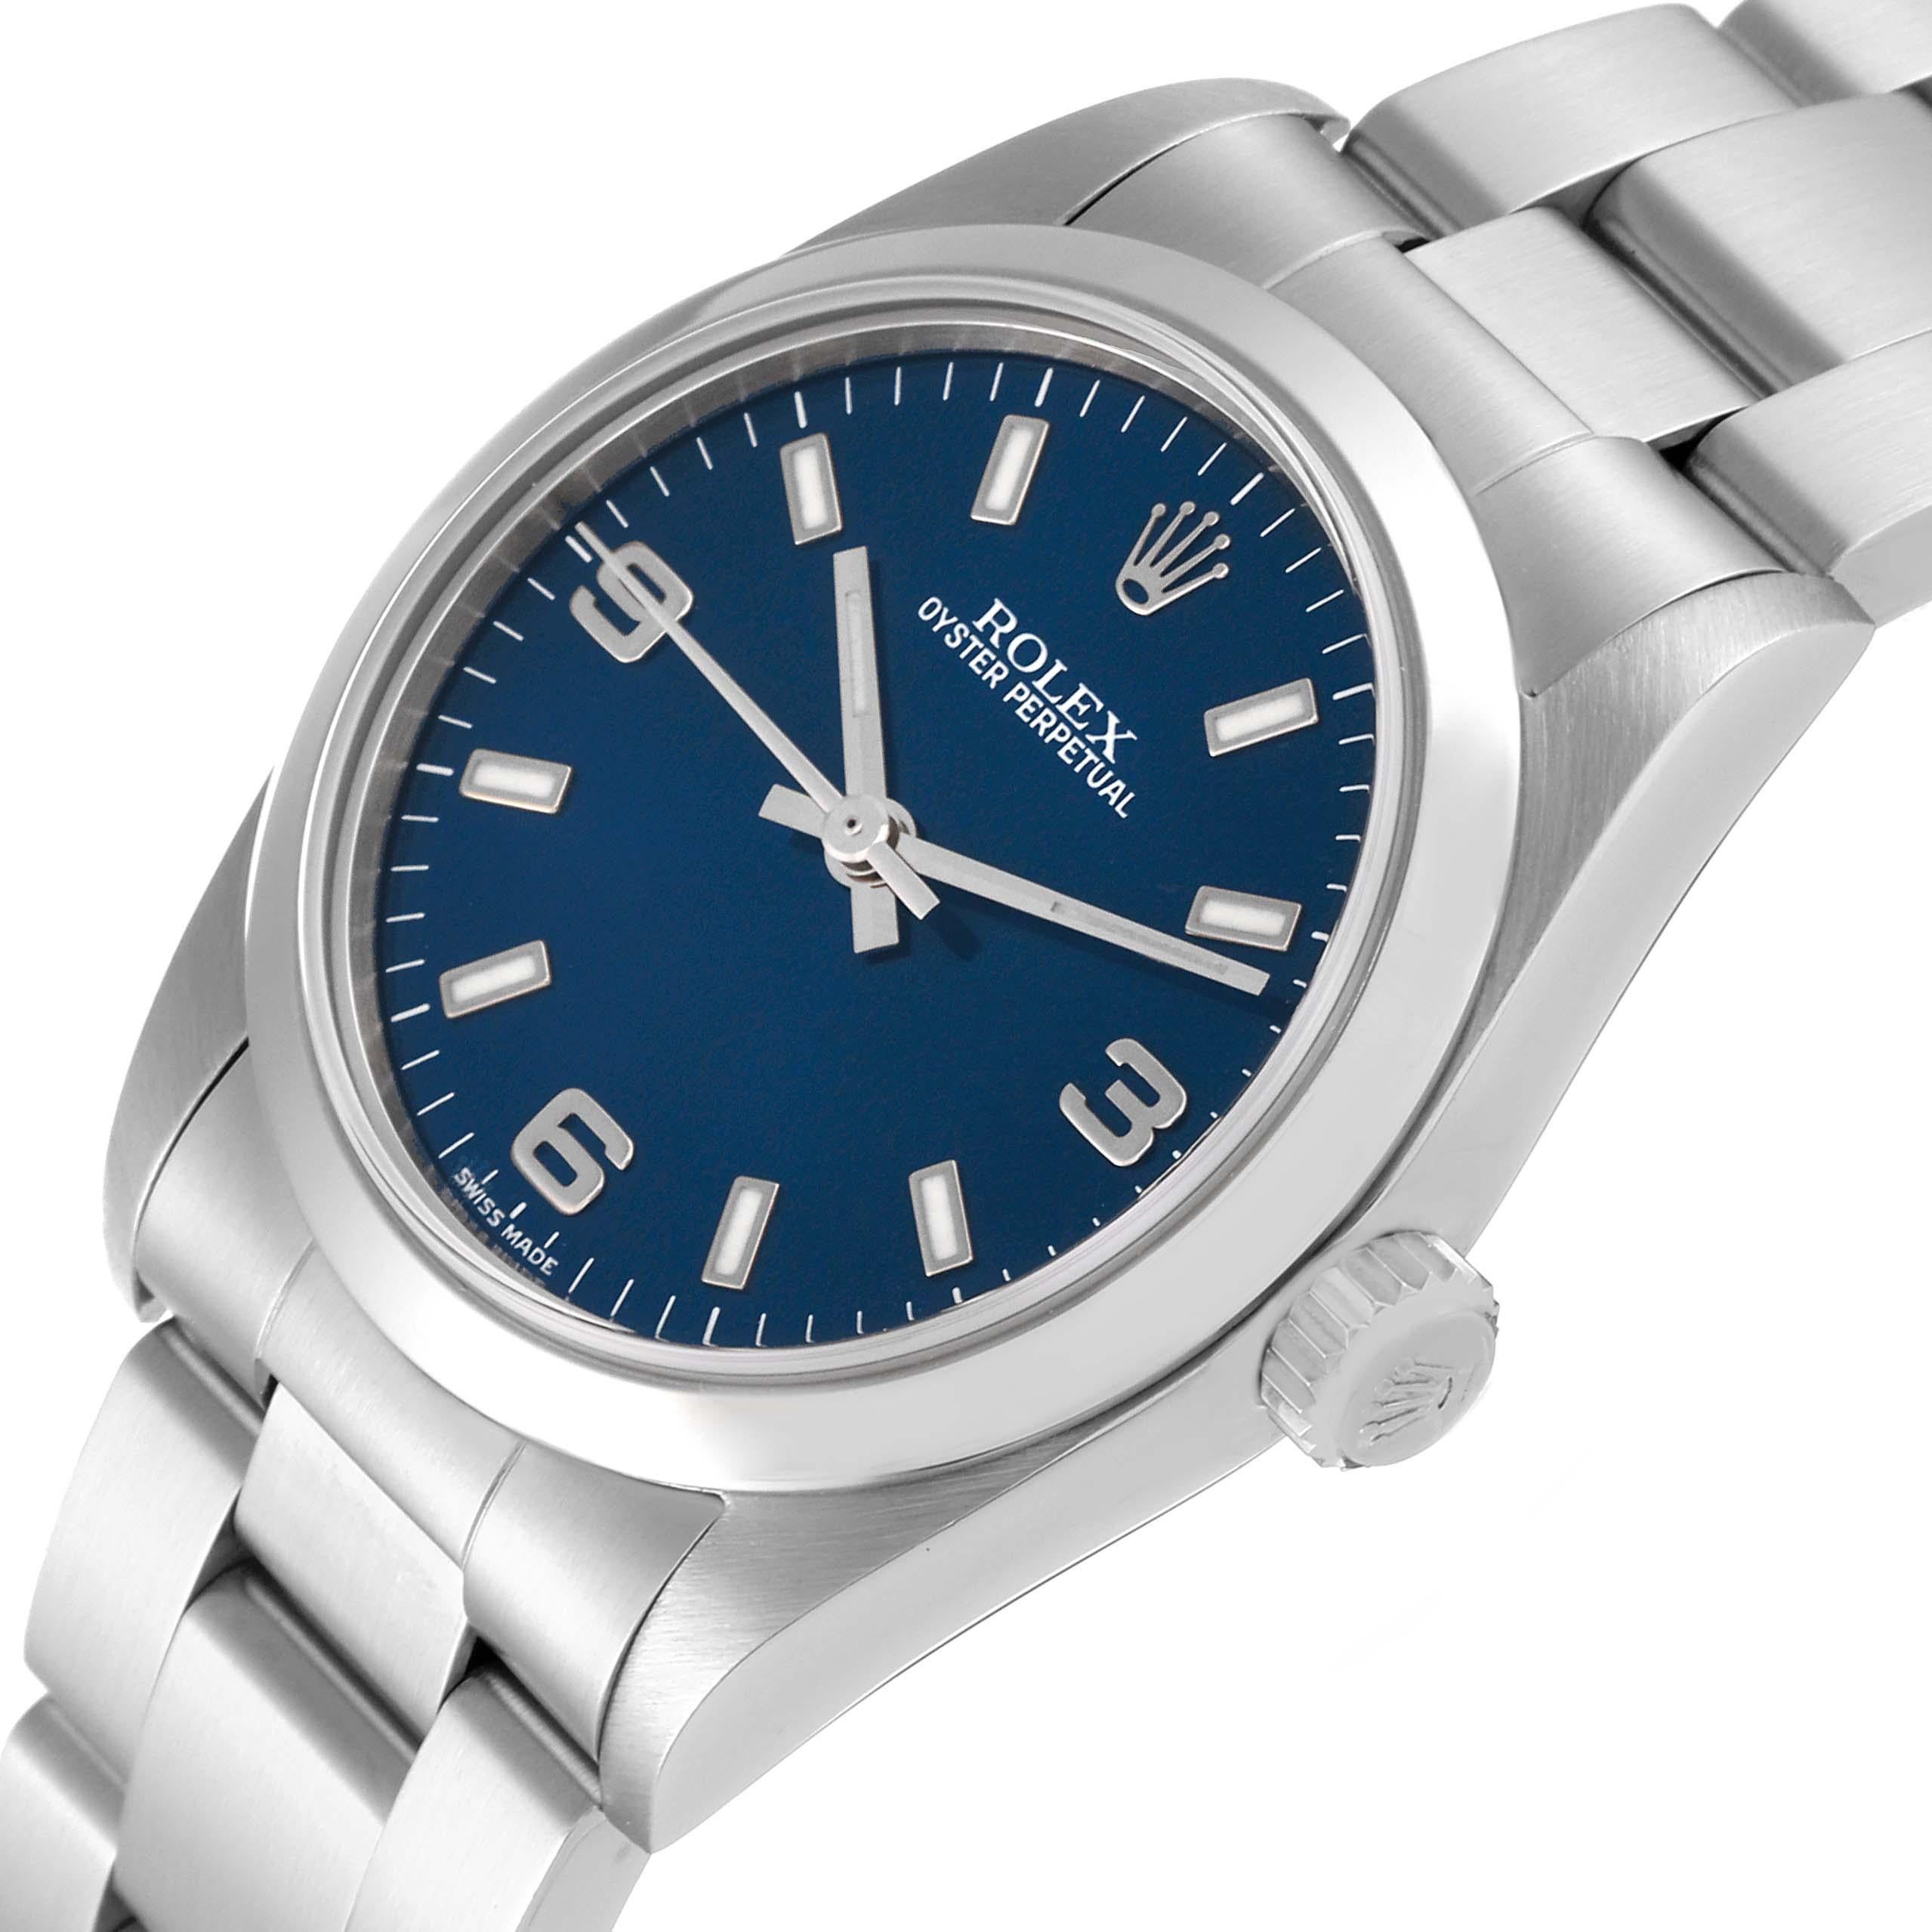 Rolex Oyster Perpetual Midsize 31 Blue Dial Steel Ladies Watch 77080 Box Papers. Officially certified chronometer automatic self-winding movement. Stainless steel oyster case 31 mm in diameter. Rolex logo on the crown. Stainless steel smooth bezel.